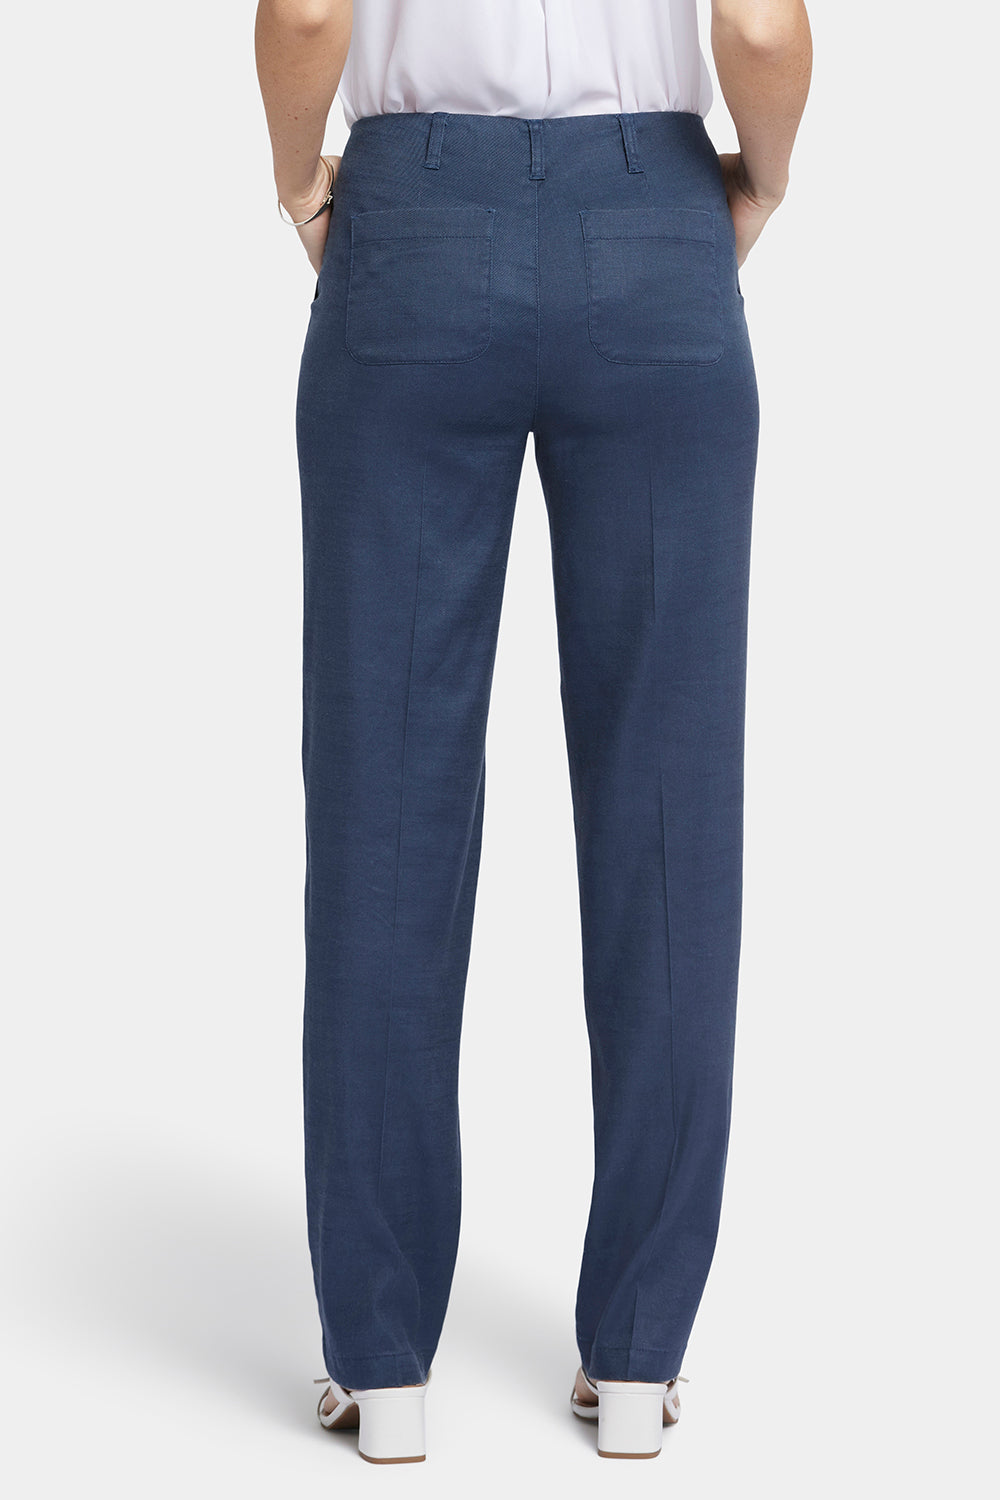 NYDJ Marilyn Straight Pants In Stretch Linen - Oxford Navy